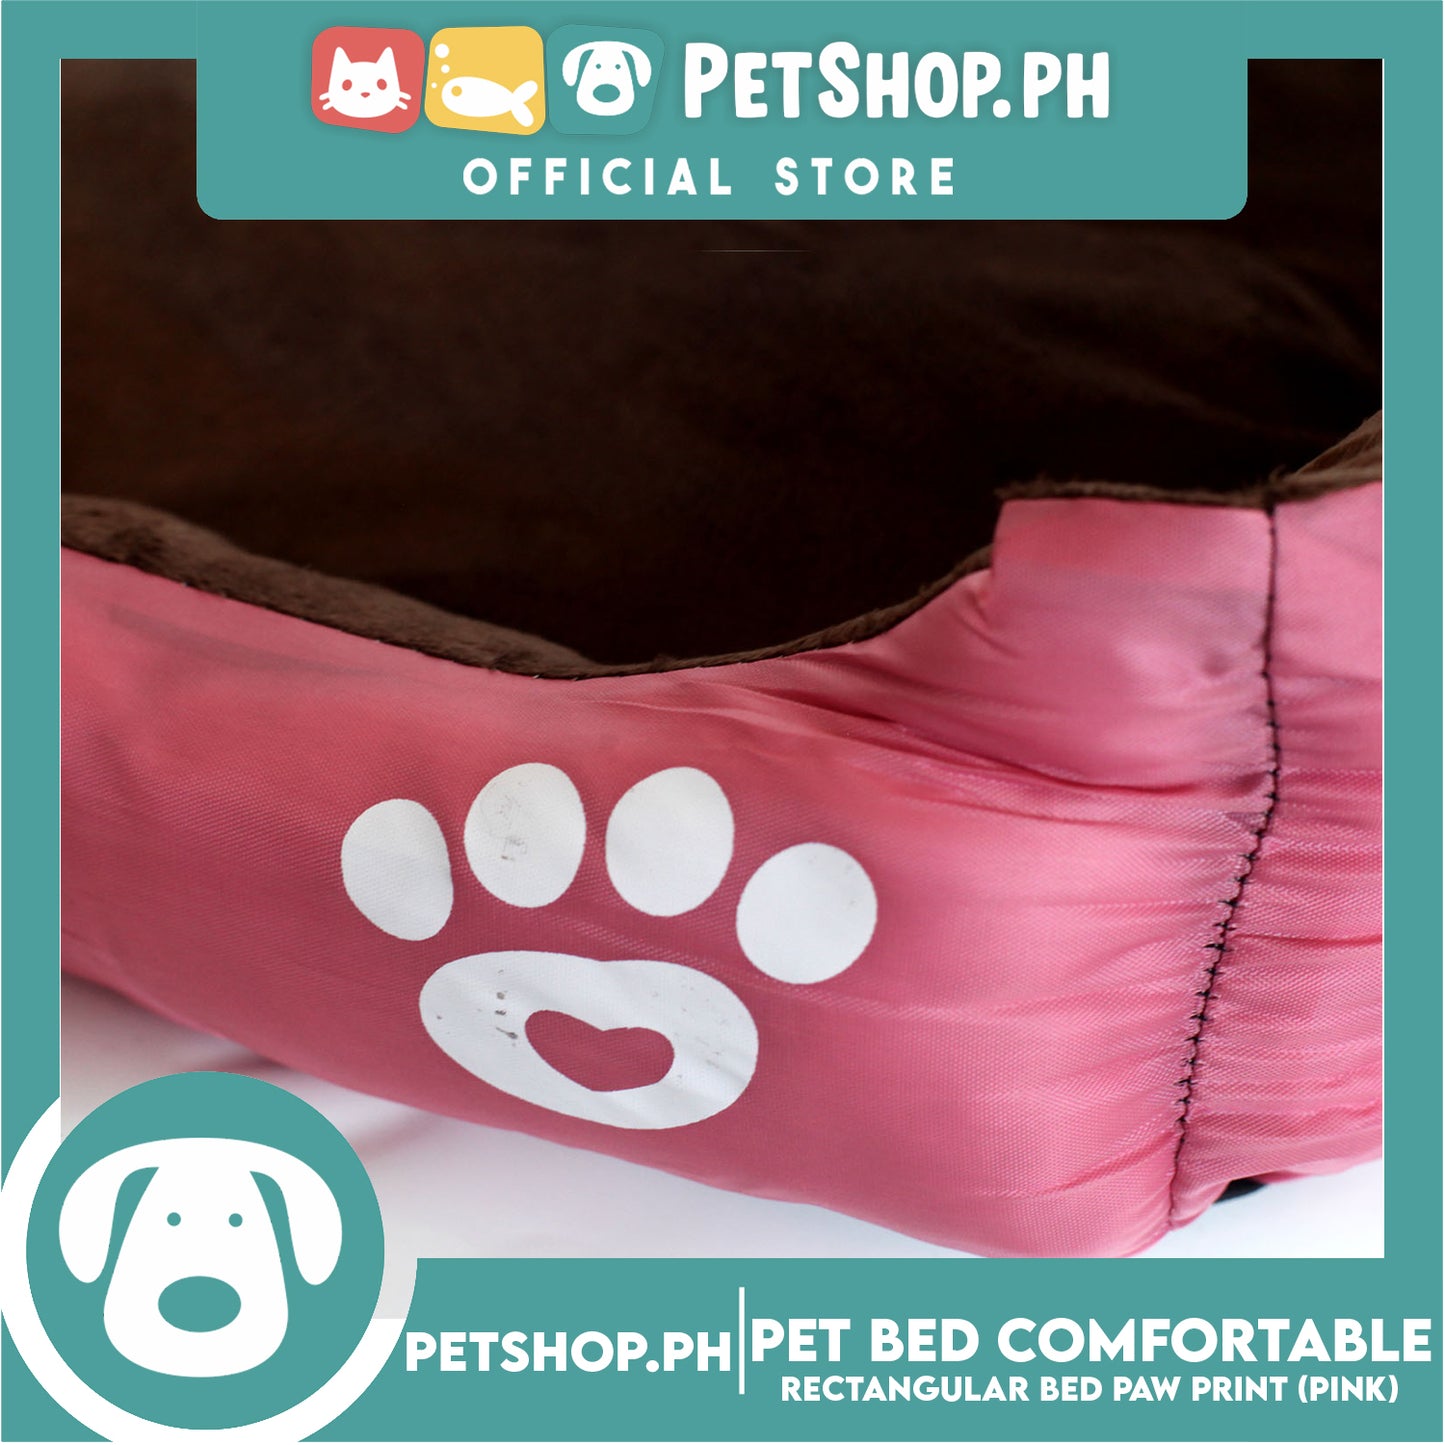 Pet Bed Comfortable Rectangular Pet Bed with Paw Print 50x40x12cm Small for Dogs & Cats (Pink)